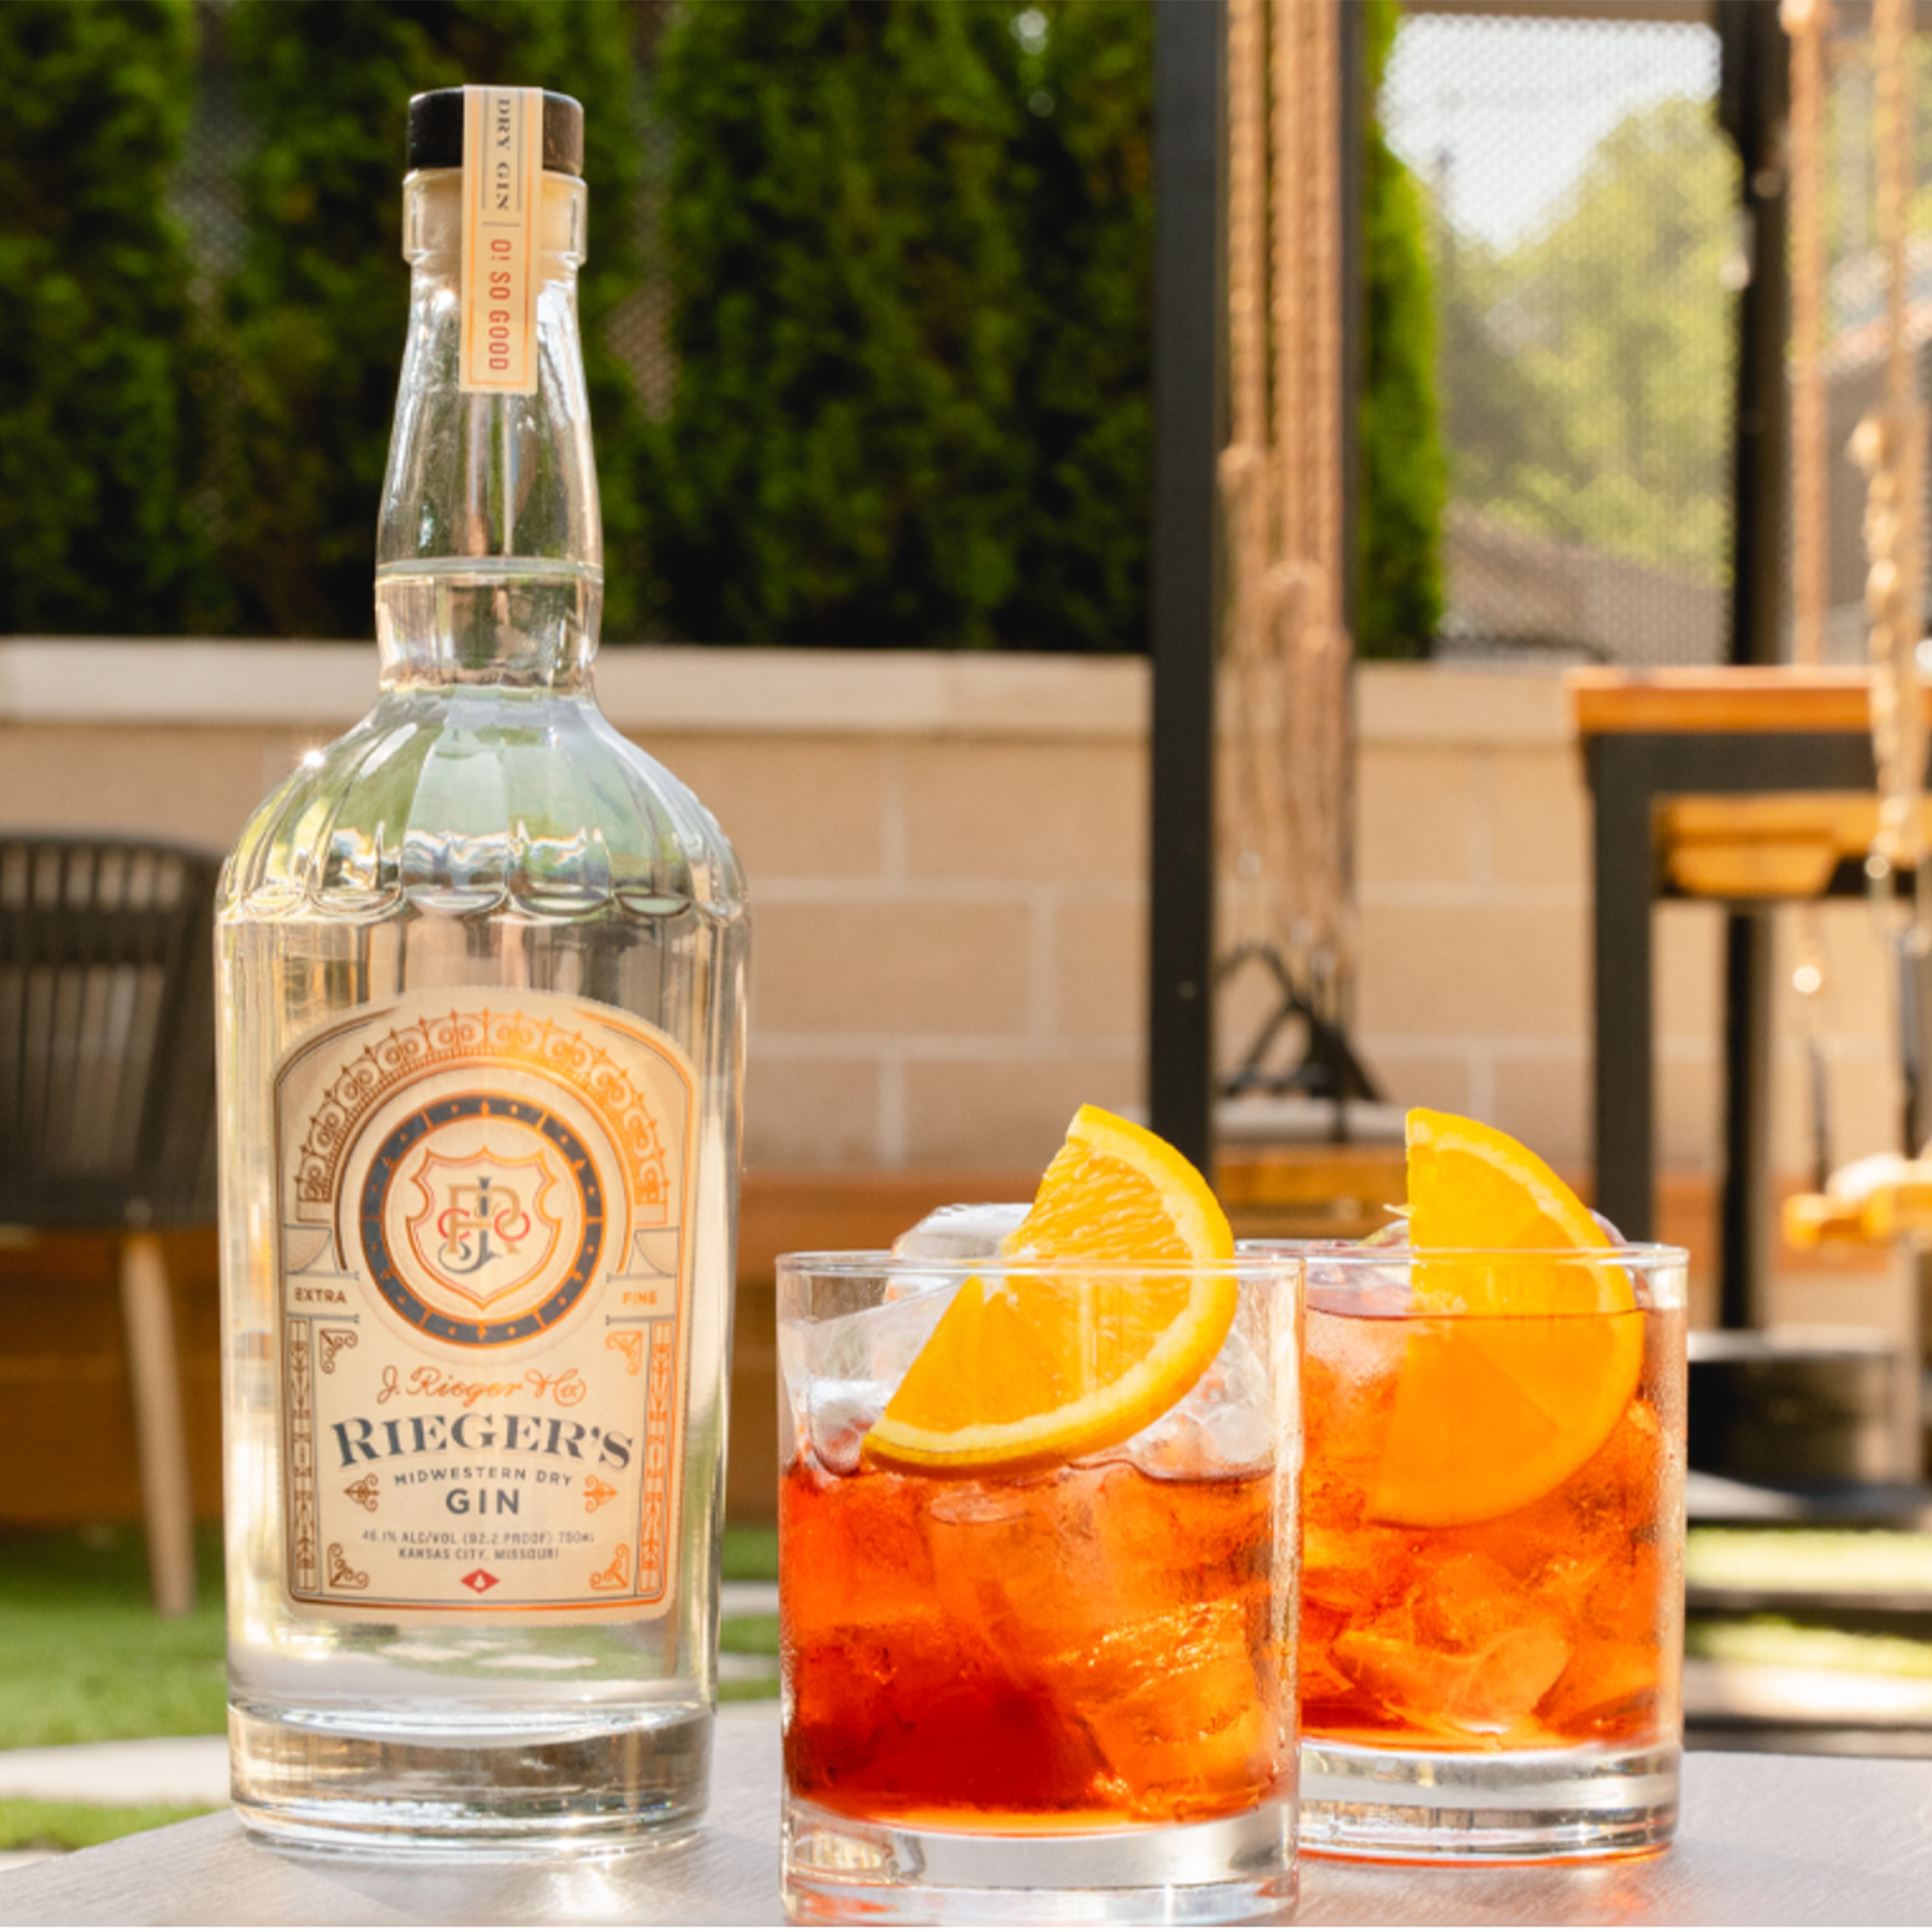 J. Rieger and Co. Midwestern Dry Gin